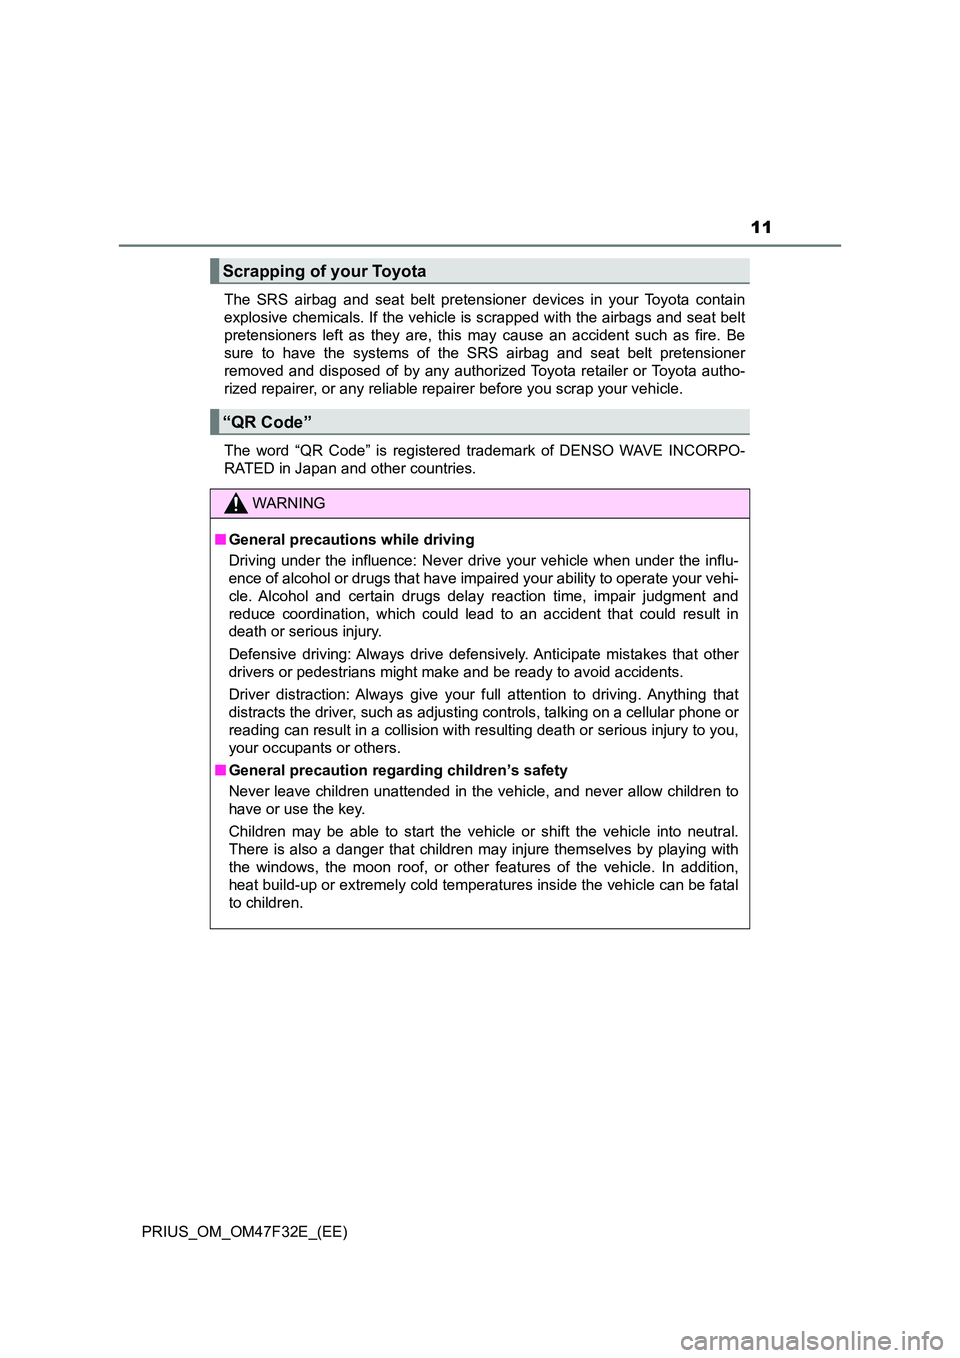 TOYOTA PRIUS 2023  Owners Manual 11
PRIUS_OM_OM47F32E_(EE) 
The SRS airbag and seat belt pretensioner devices in your Toyota contain 
explosive chemicals. If the vehicle is scrapped with the airbags and seat belt
pretensioners left a